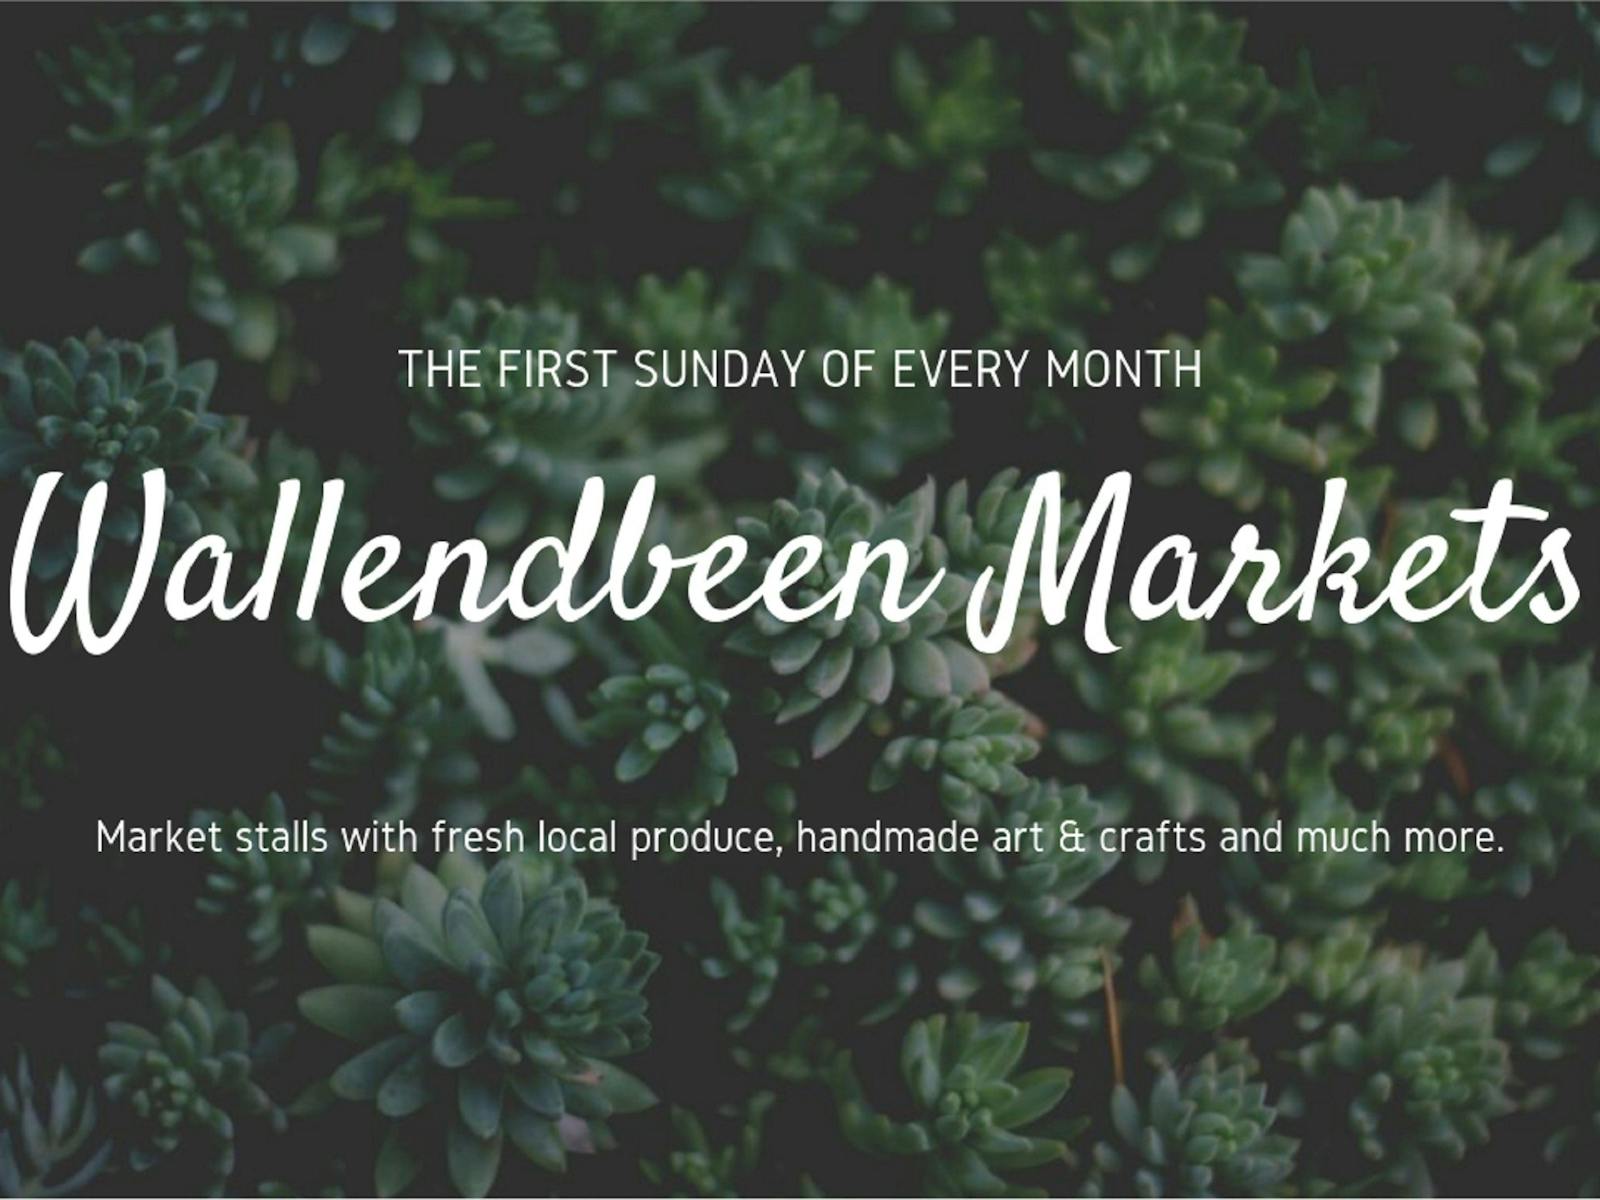 Image for Wallendbeen Markets